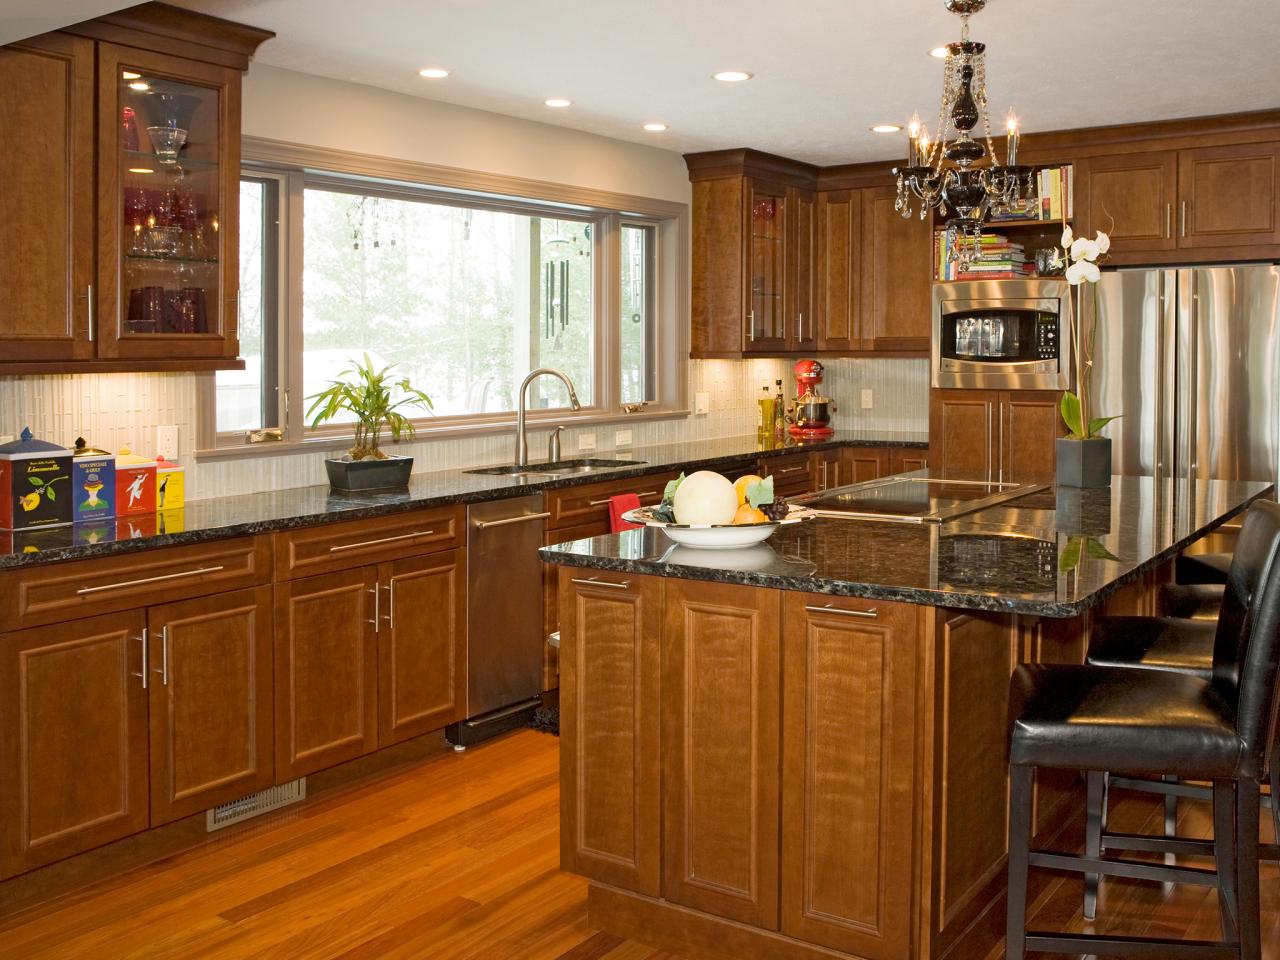 Good Paint Colors For Kitchens With Golden Oak Cabinets